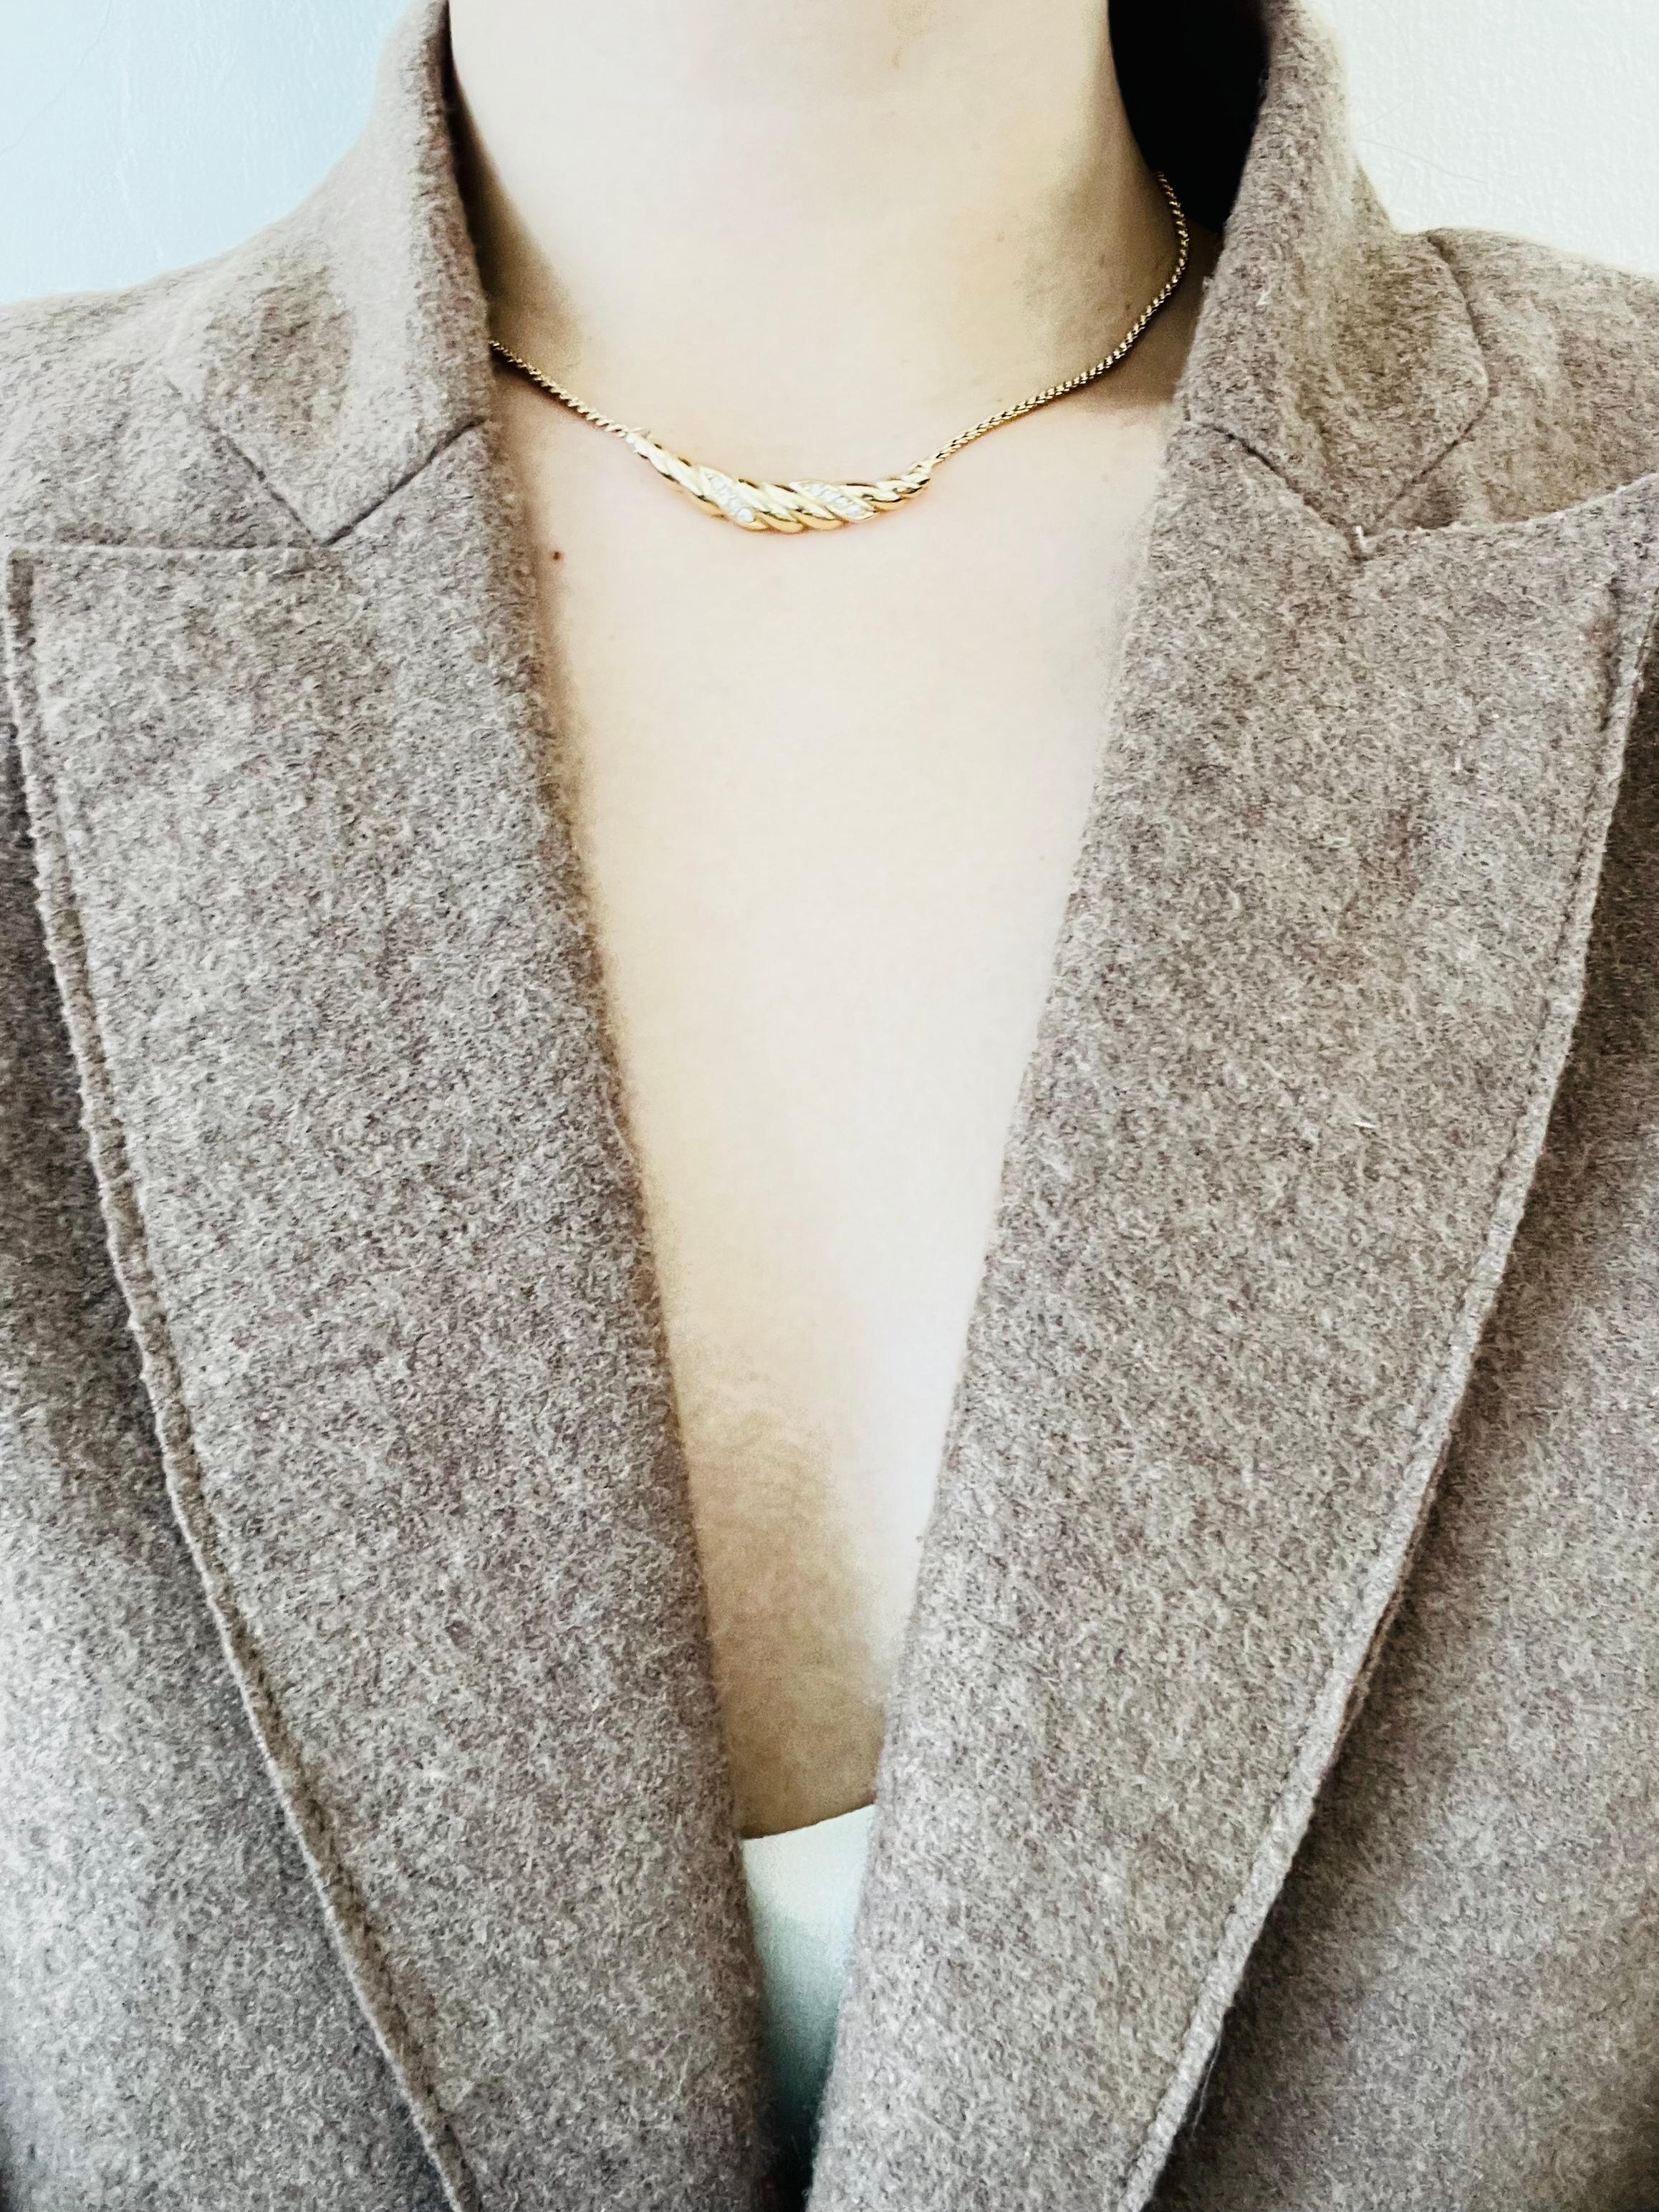 Christian Dior Vintage 1970s Long Bar Swirl Swarovski Gold Crystals Necklace In Good Condition For Sale In Wokingham, England